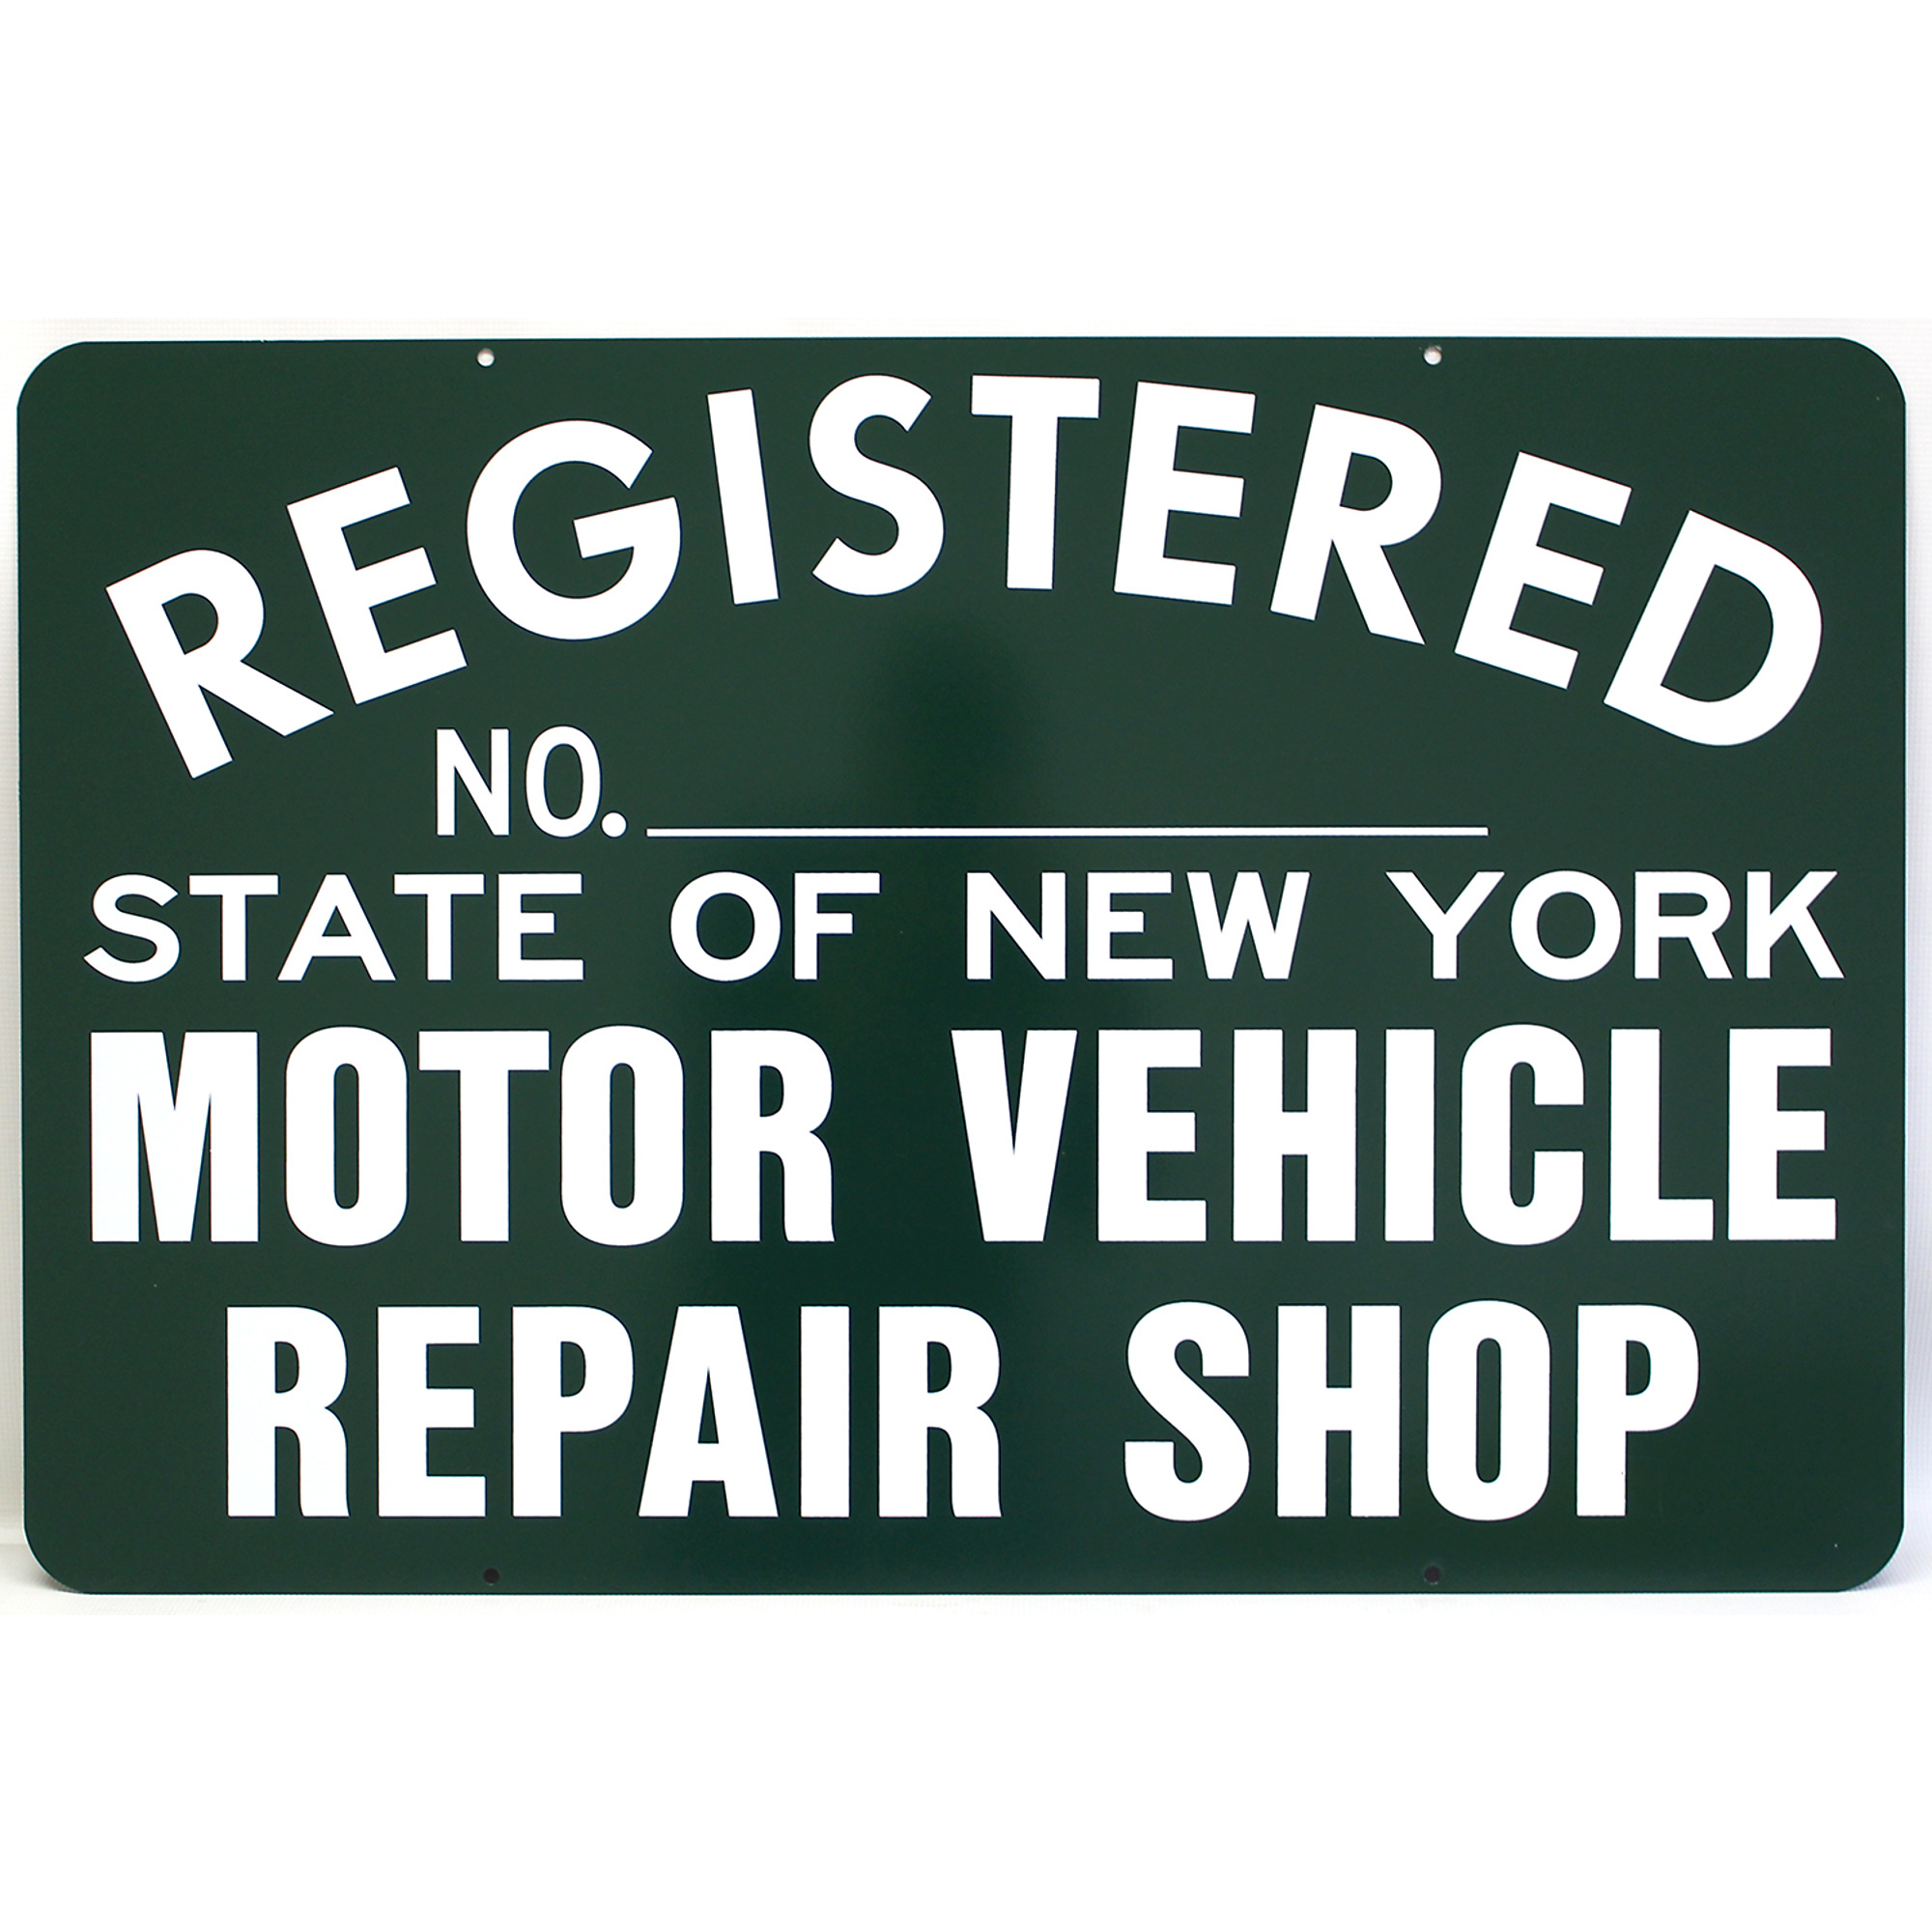 Eastern Metal, 36Inch X 24Inch X 20GA Sign, Sign Message REGISTERED NO._______ STATE OF NEW YORK MOTOR VEH, Height 36 in, Width 24 in, Model NYS-RS-DF